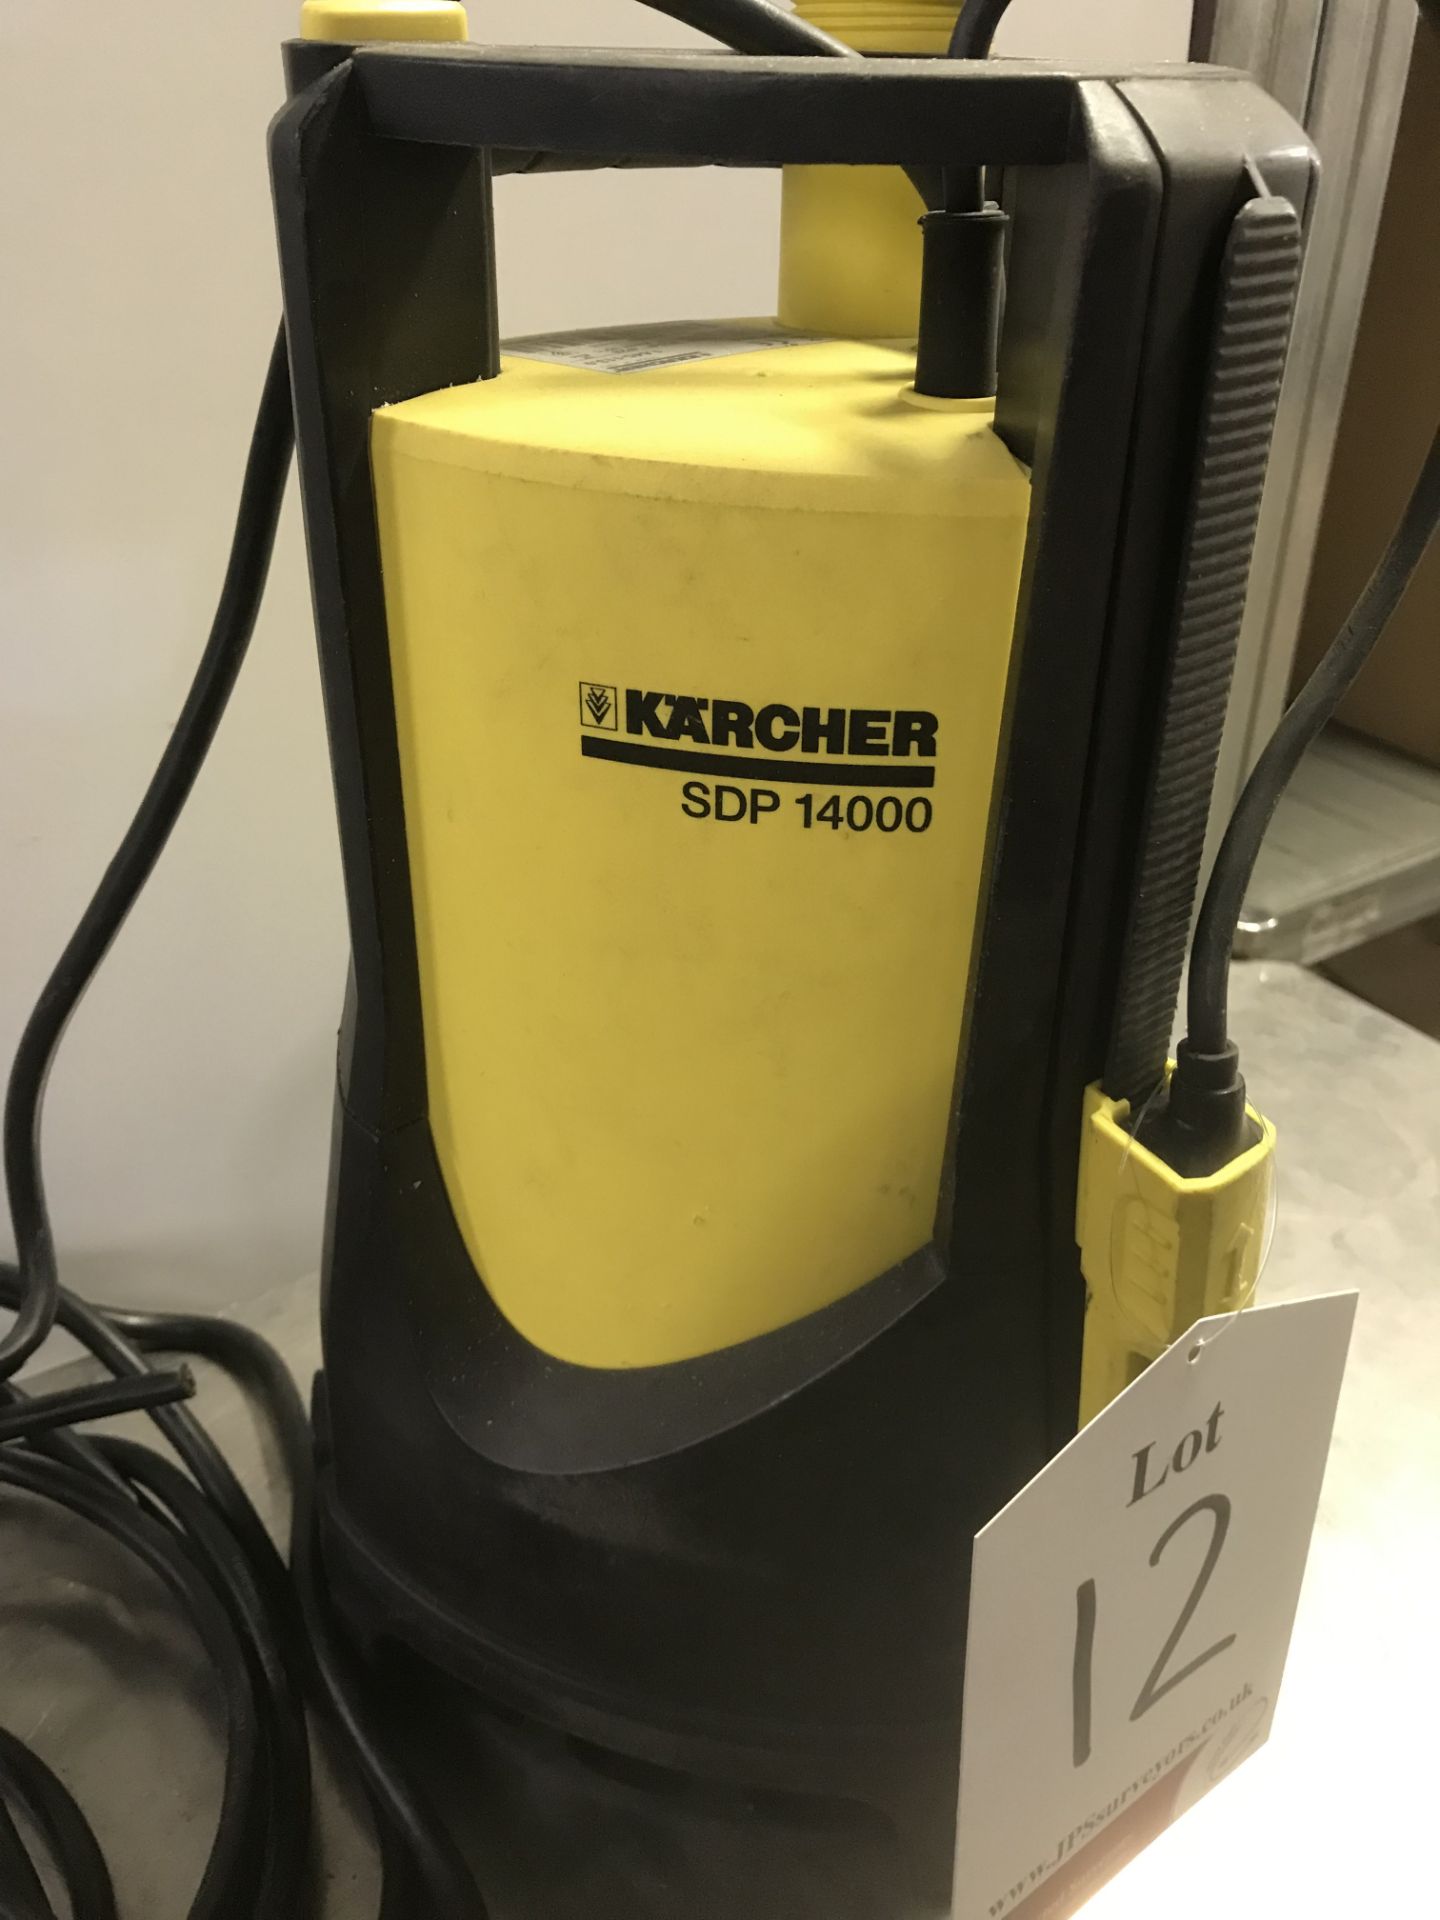 Karcher SDP 14000 submersible dirty water pump 240V - Image 2 of 4